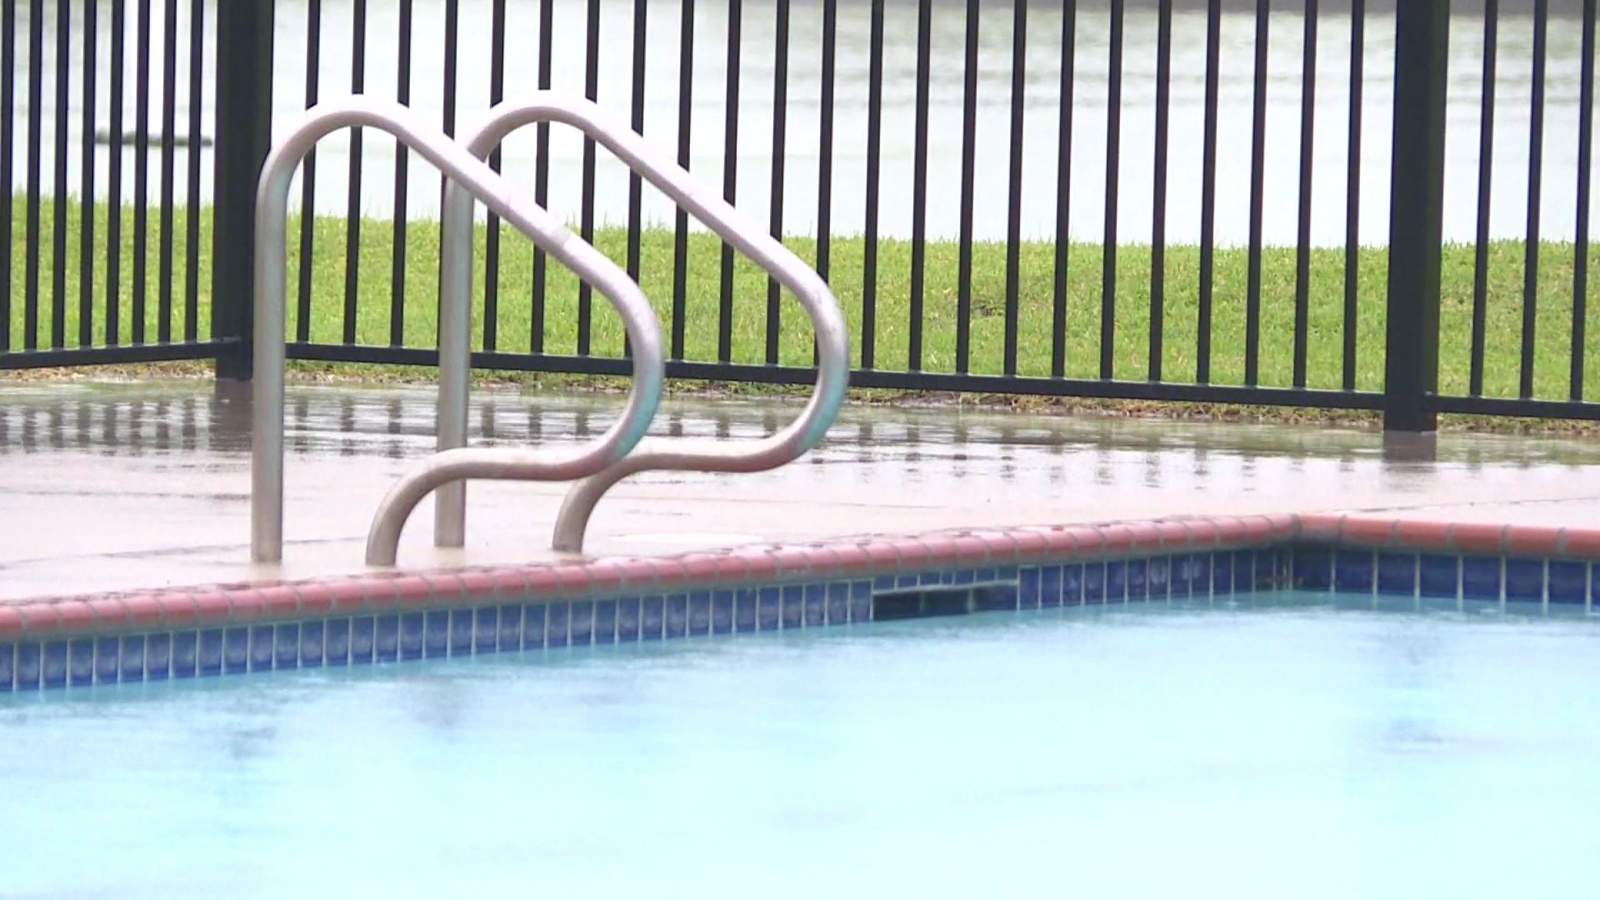 “Water safety cannot be understated”: Authorities urge pool safety during stay-at-home order